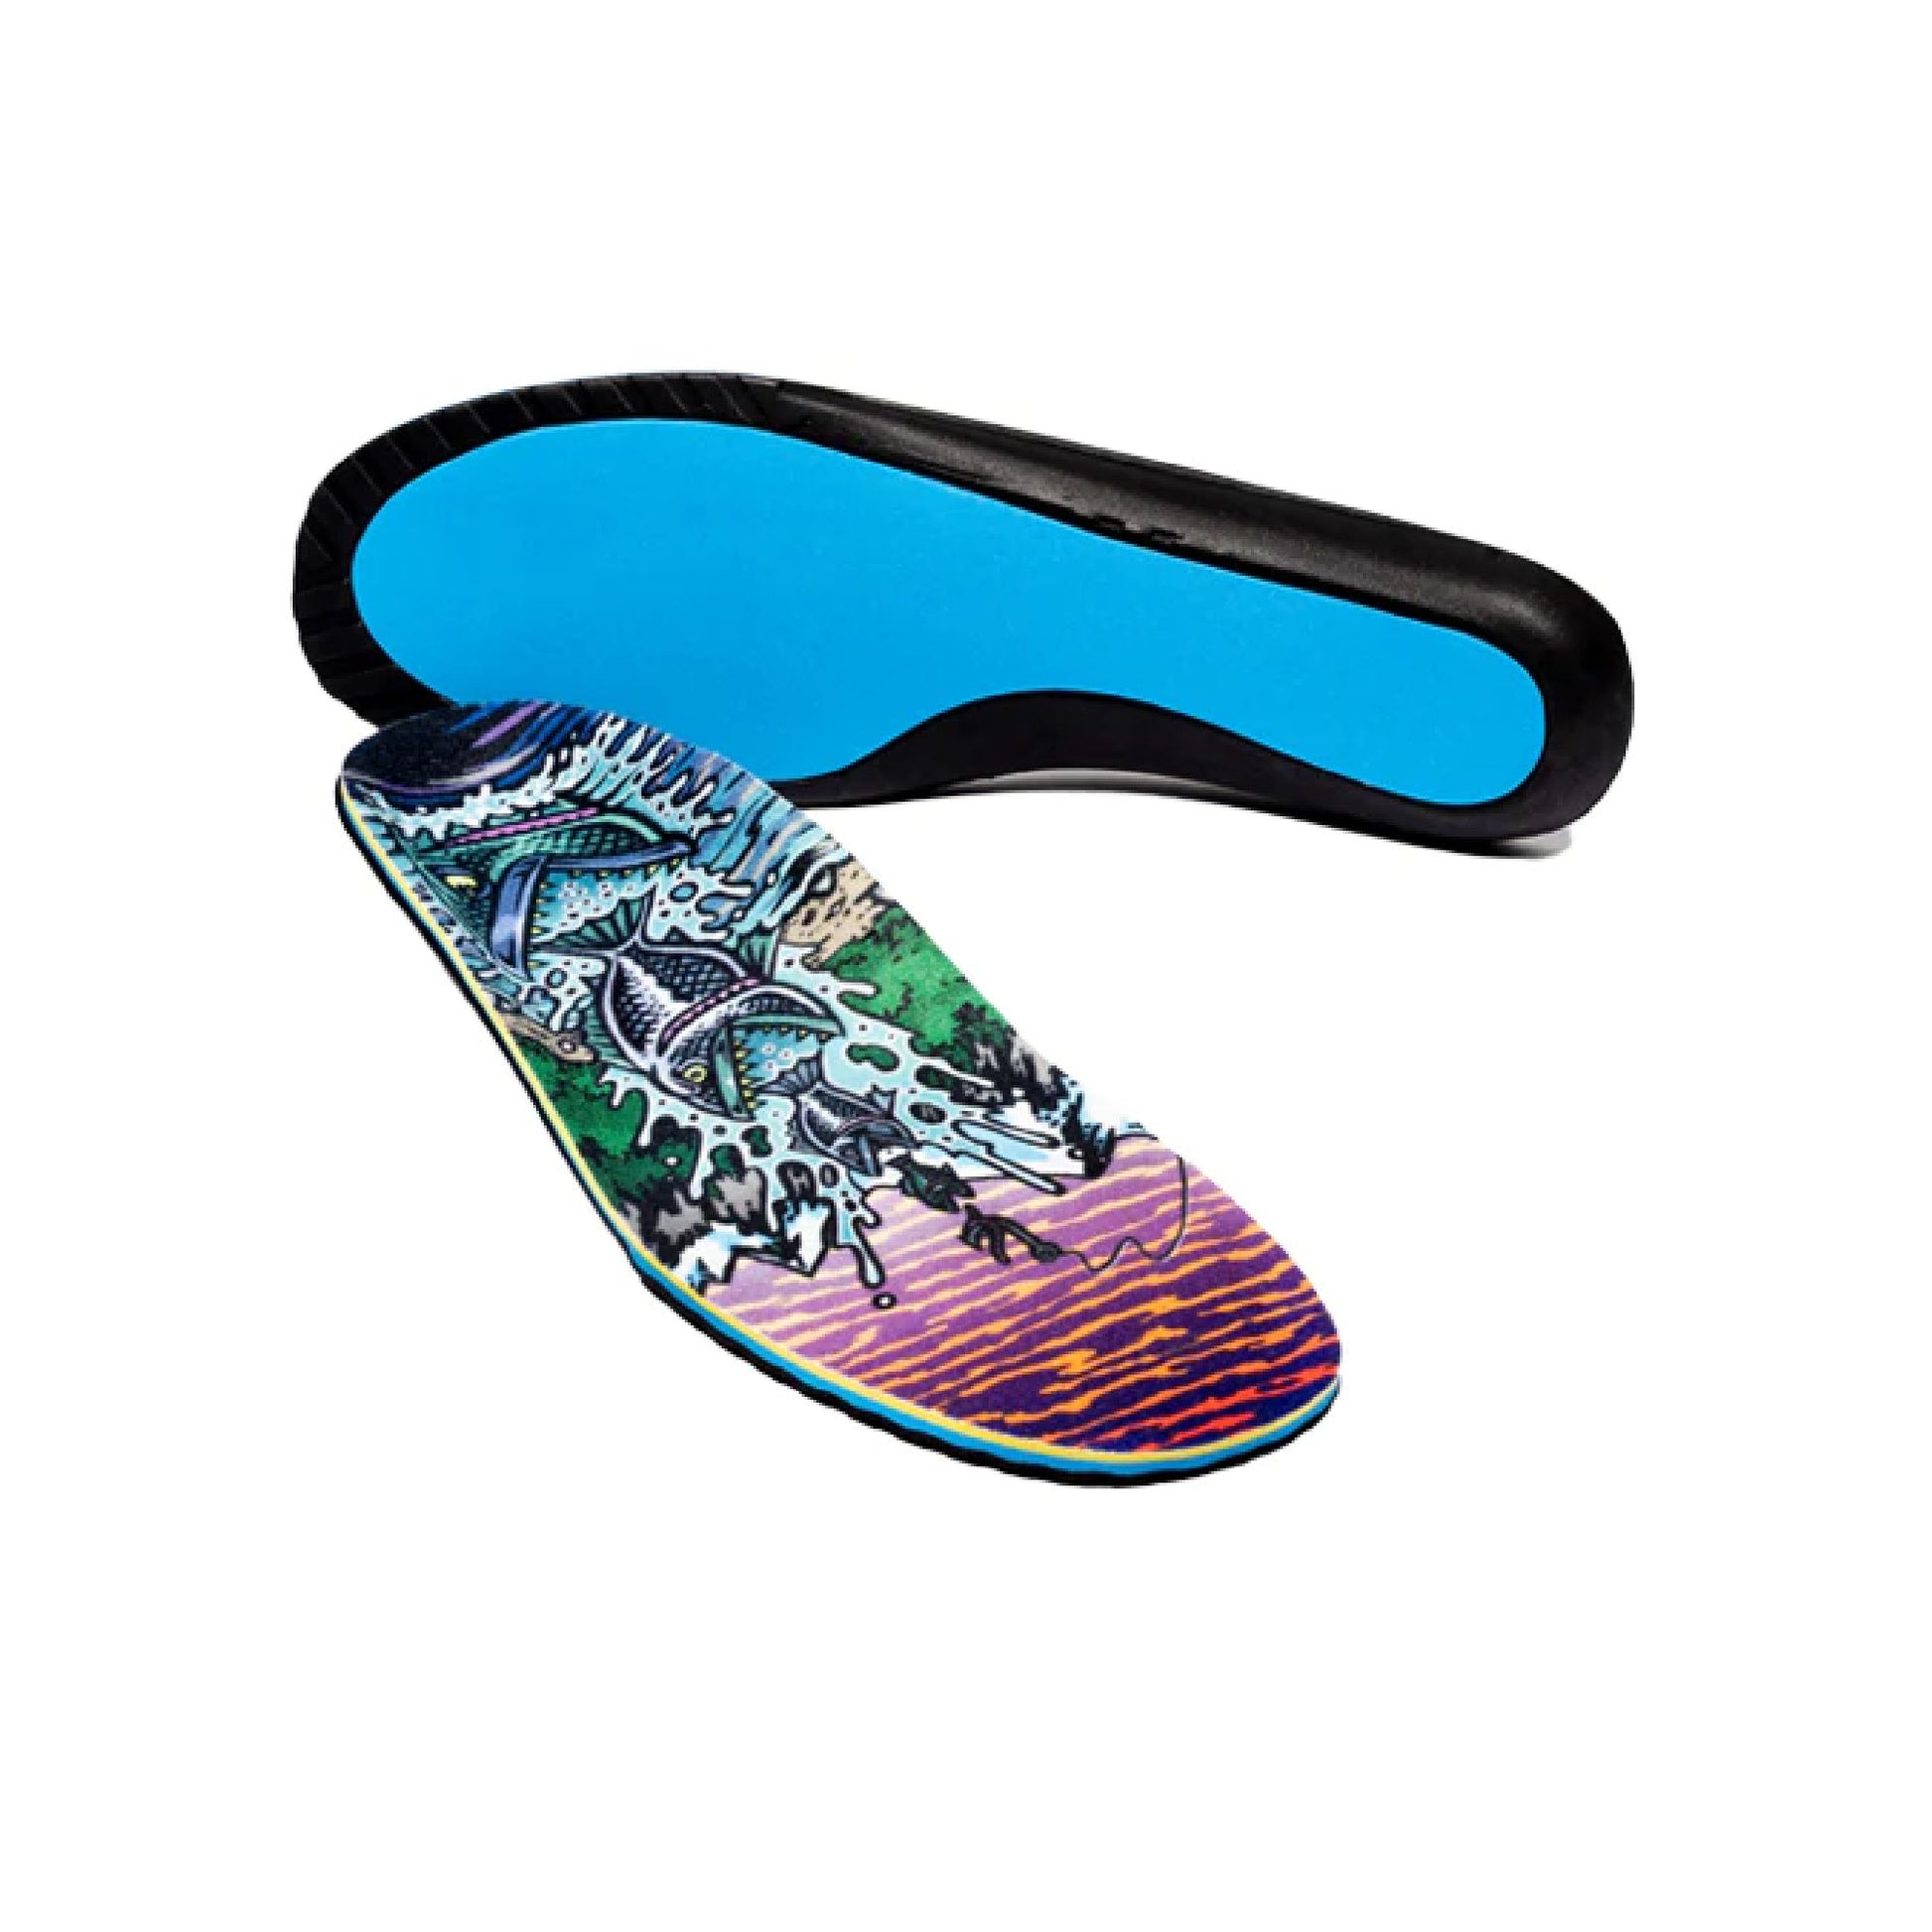 Remind Insoles Medic Impact 6mm Insoles Jackson Bros. Food Chain 9 9.5 Insoles